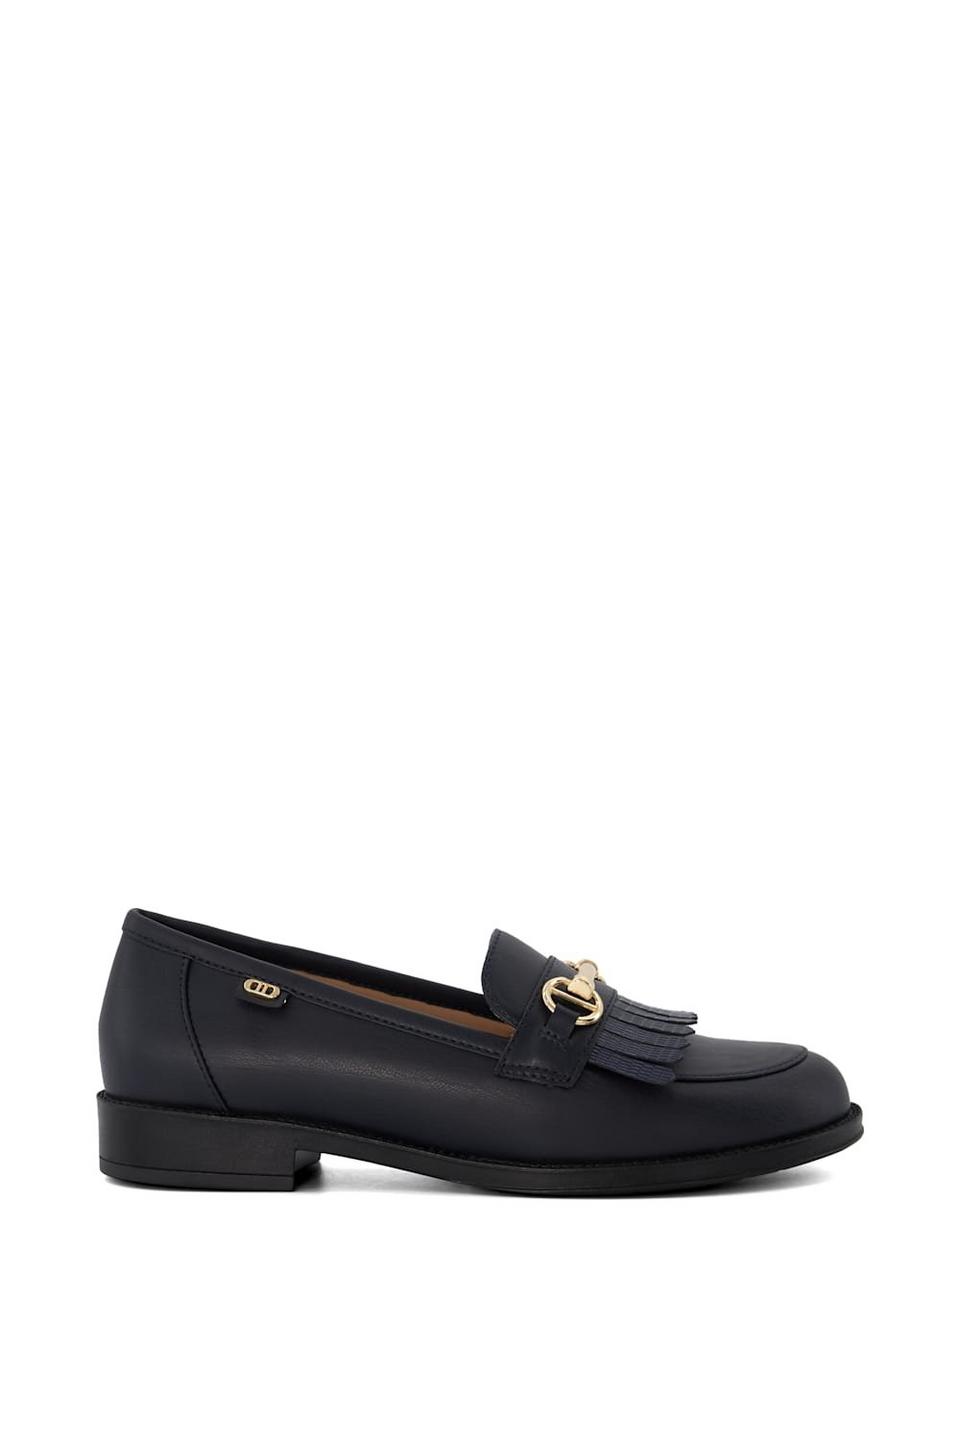 Flats | 'Gesture' Loafers | Dune London